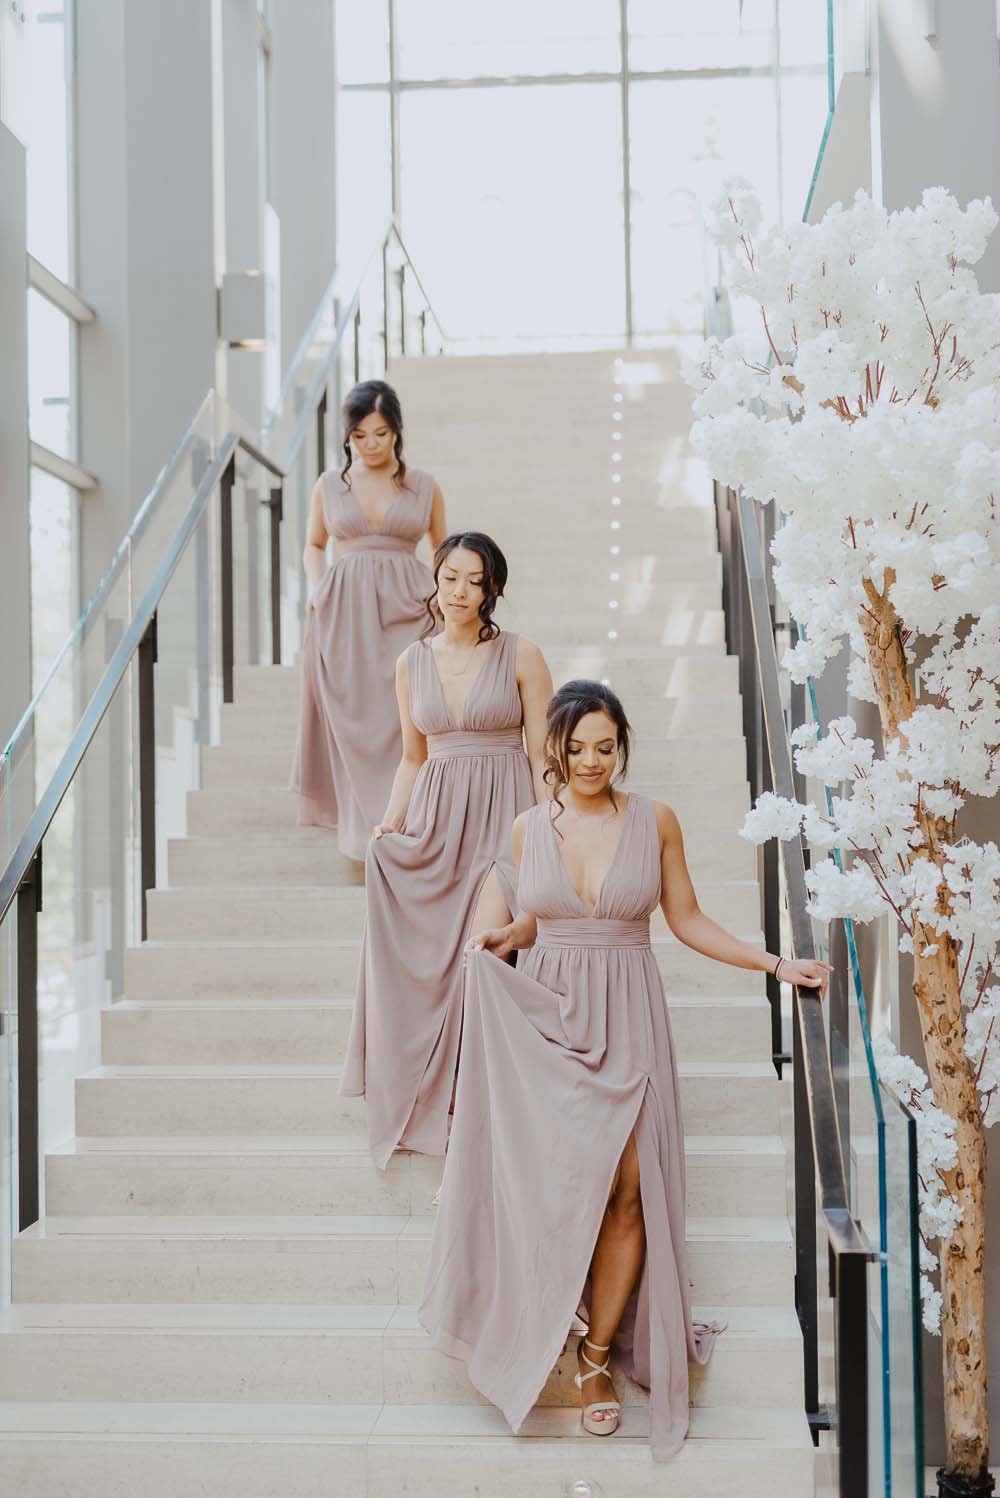 An Opulent Wedding At The Royal Conservatory Of Music - Bridal party